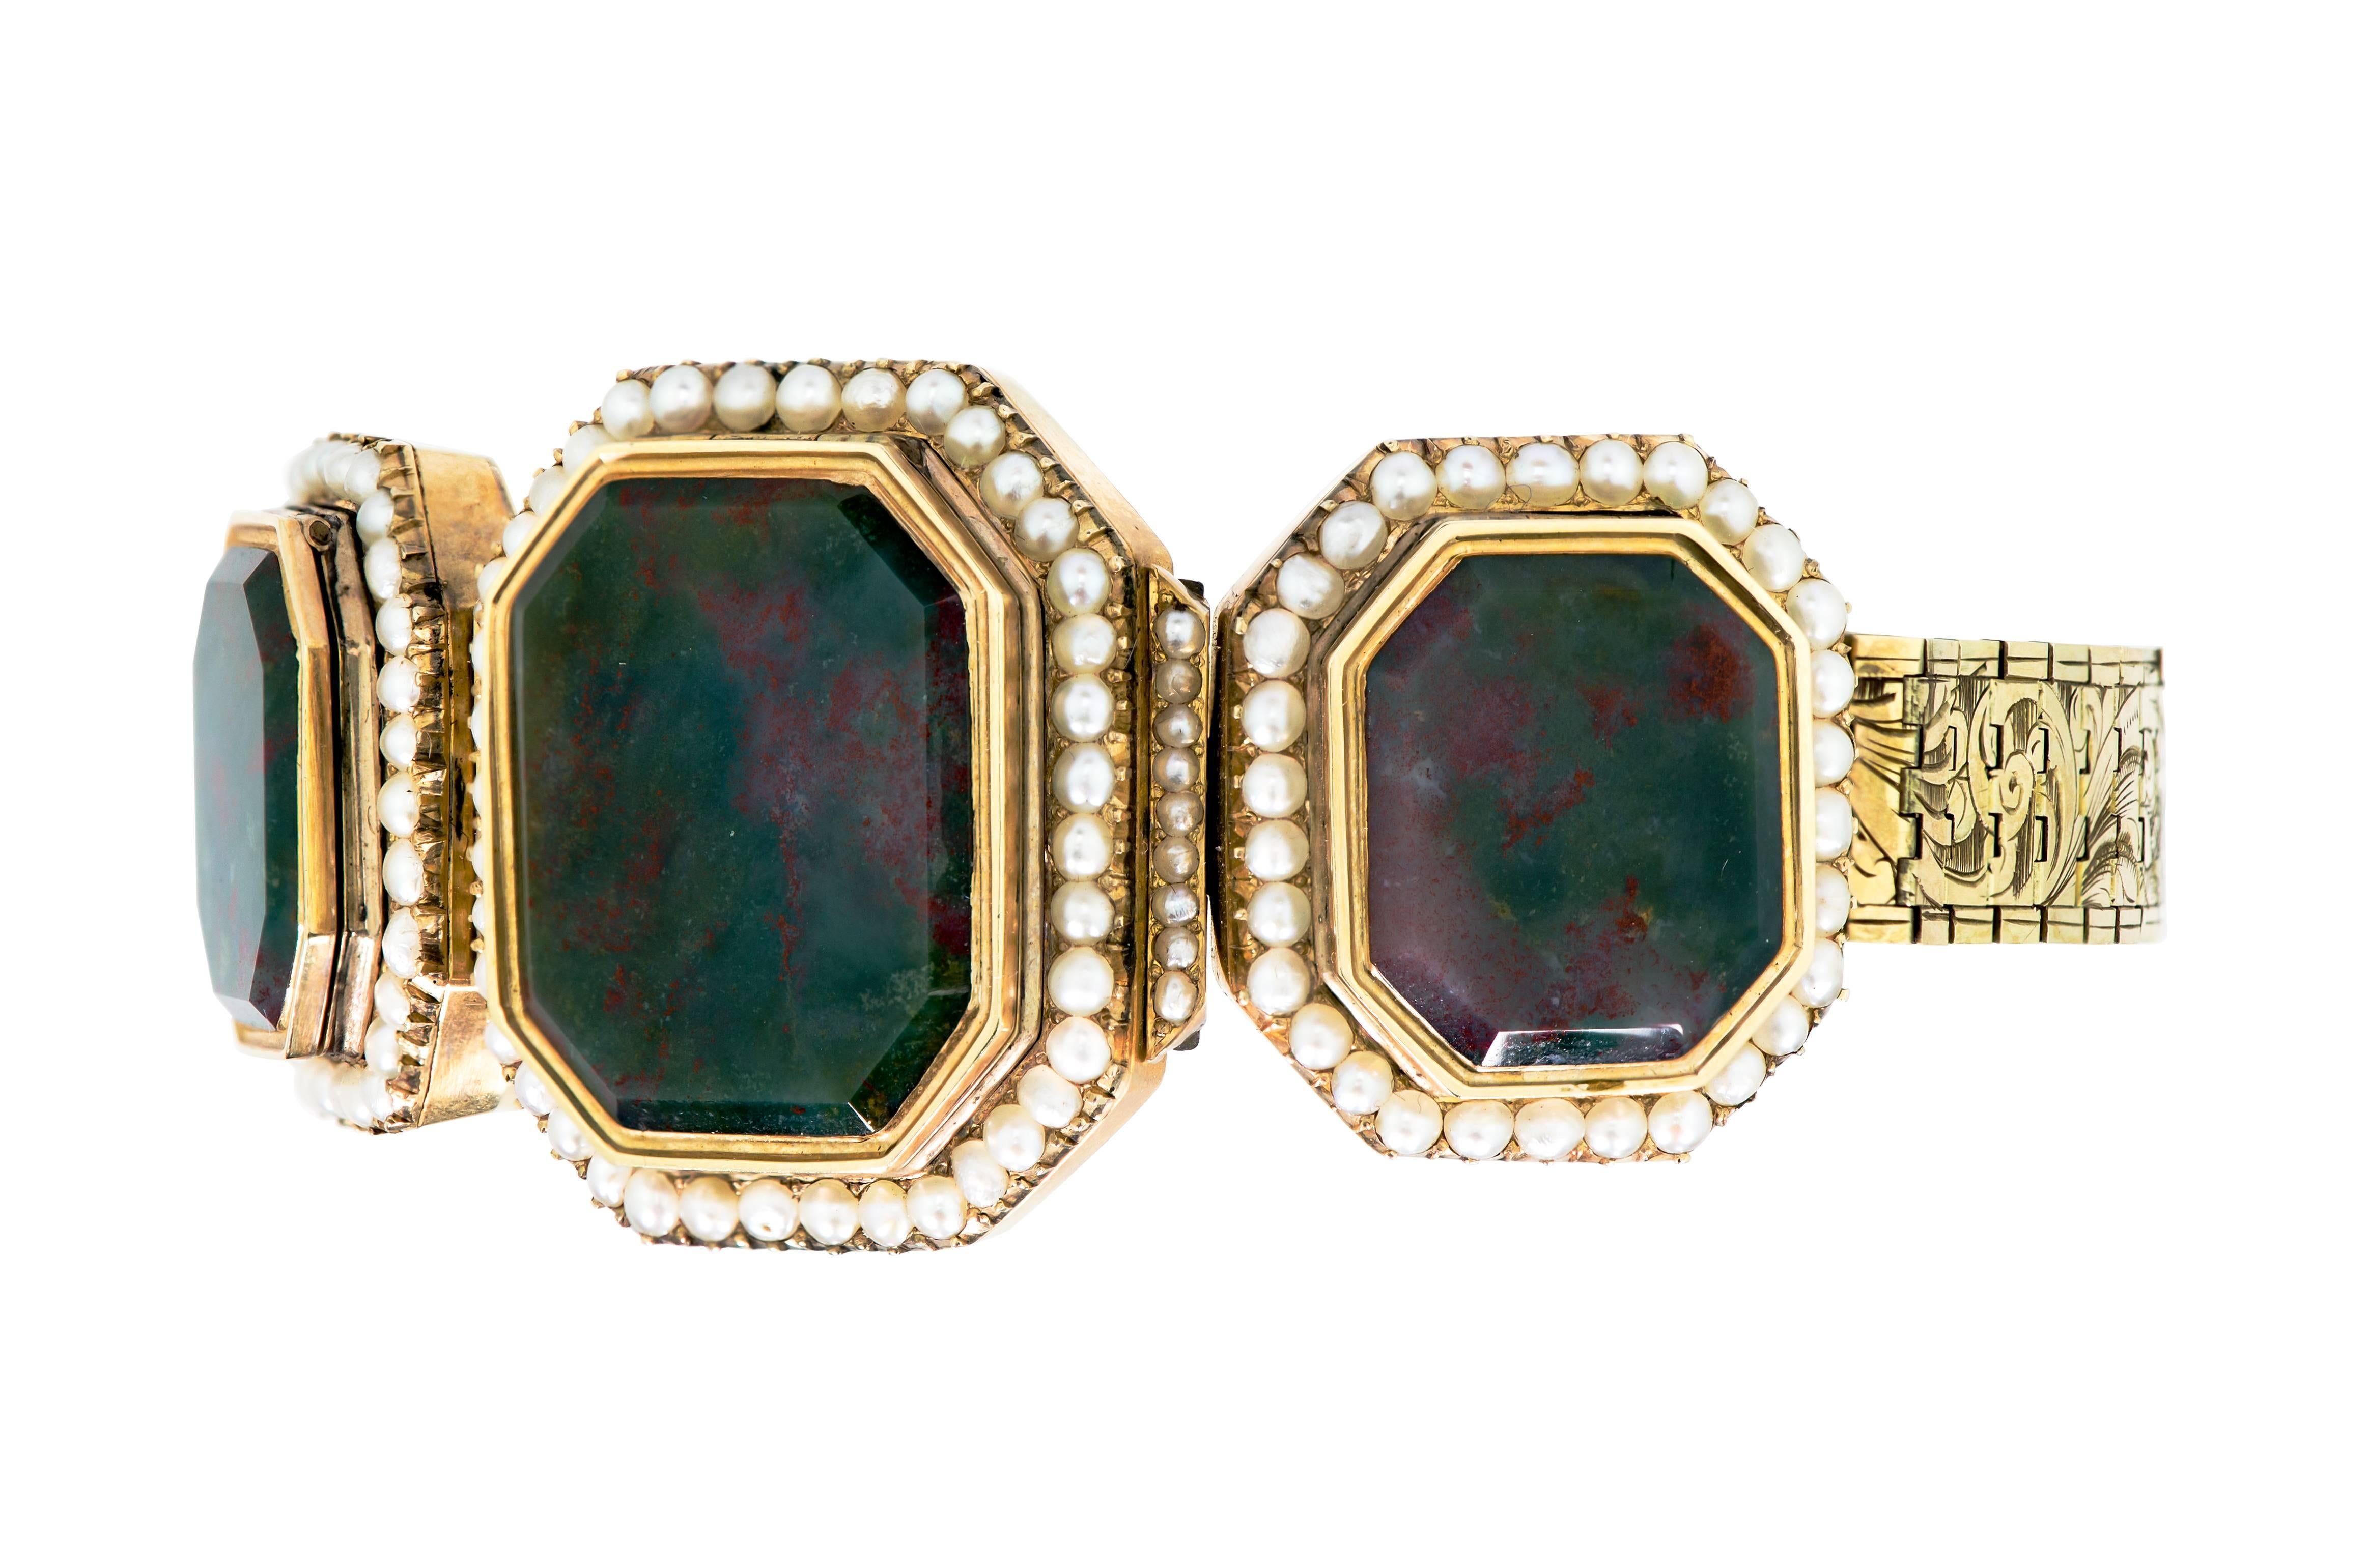 Beautiful Victorian Bloodstone Seed Pearl and Yellow Gold Flexible Bracelet consisting of three rectangular bloodstone tablets with seed pearl surround set in an elaborate engraved foliate design flexible link bracelet - with engraved clasp all